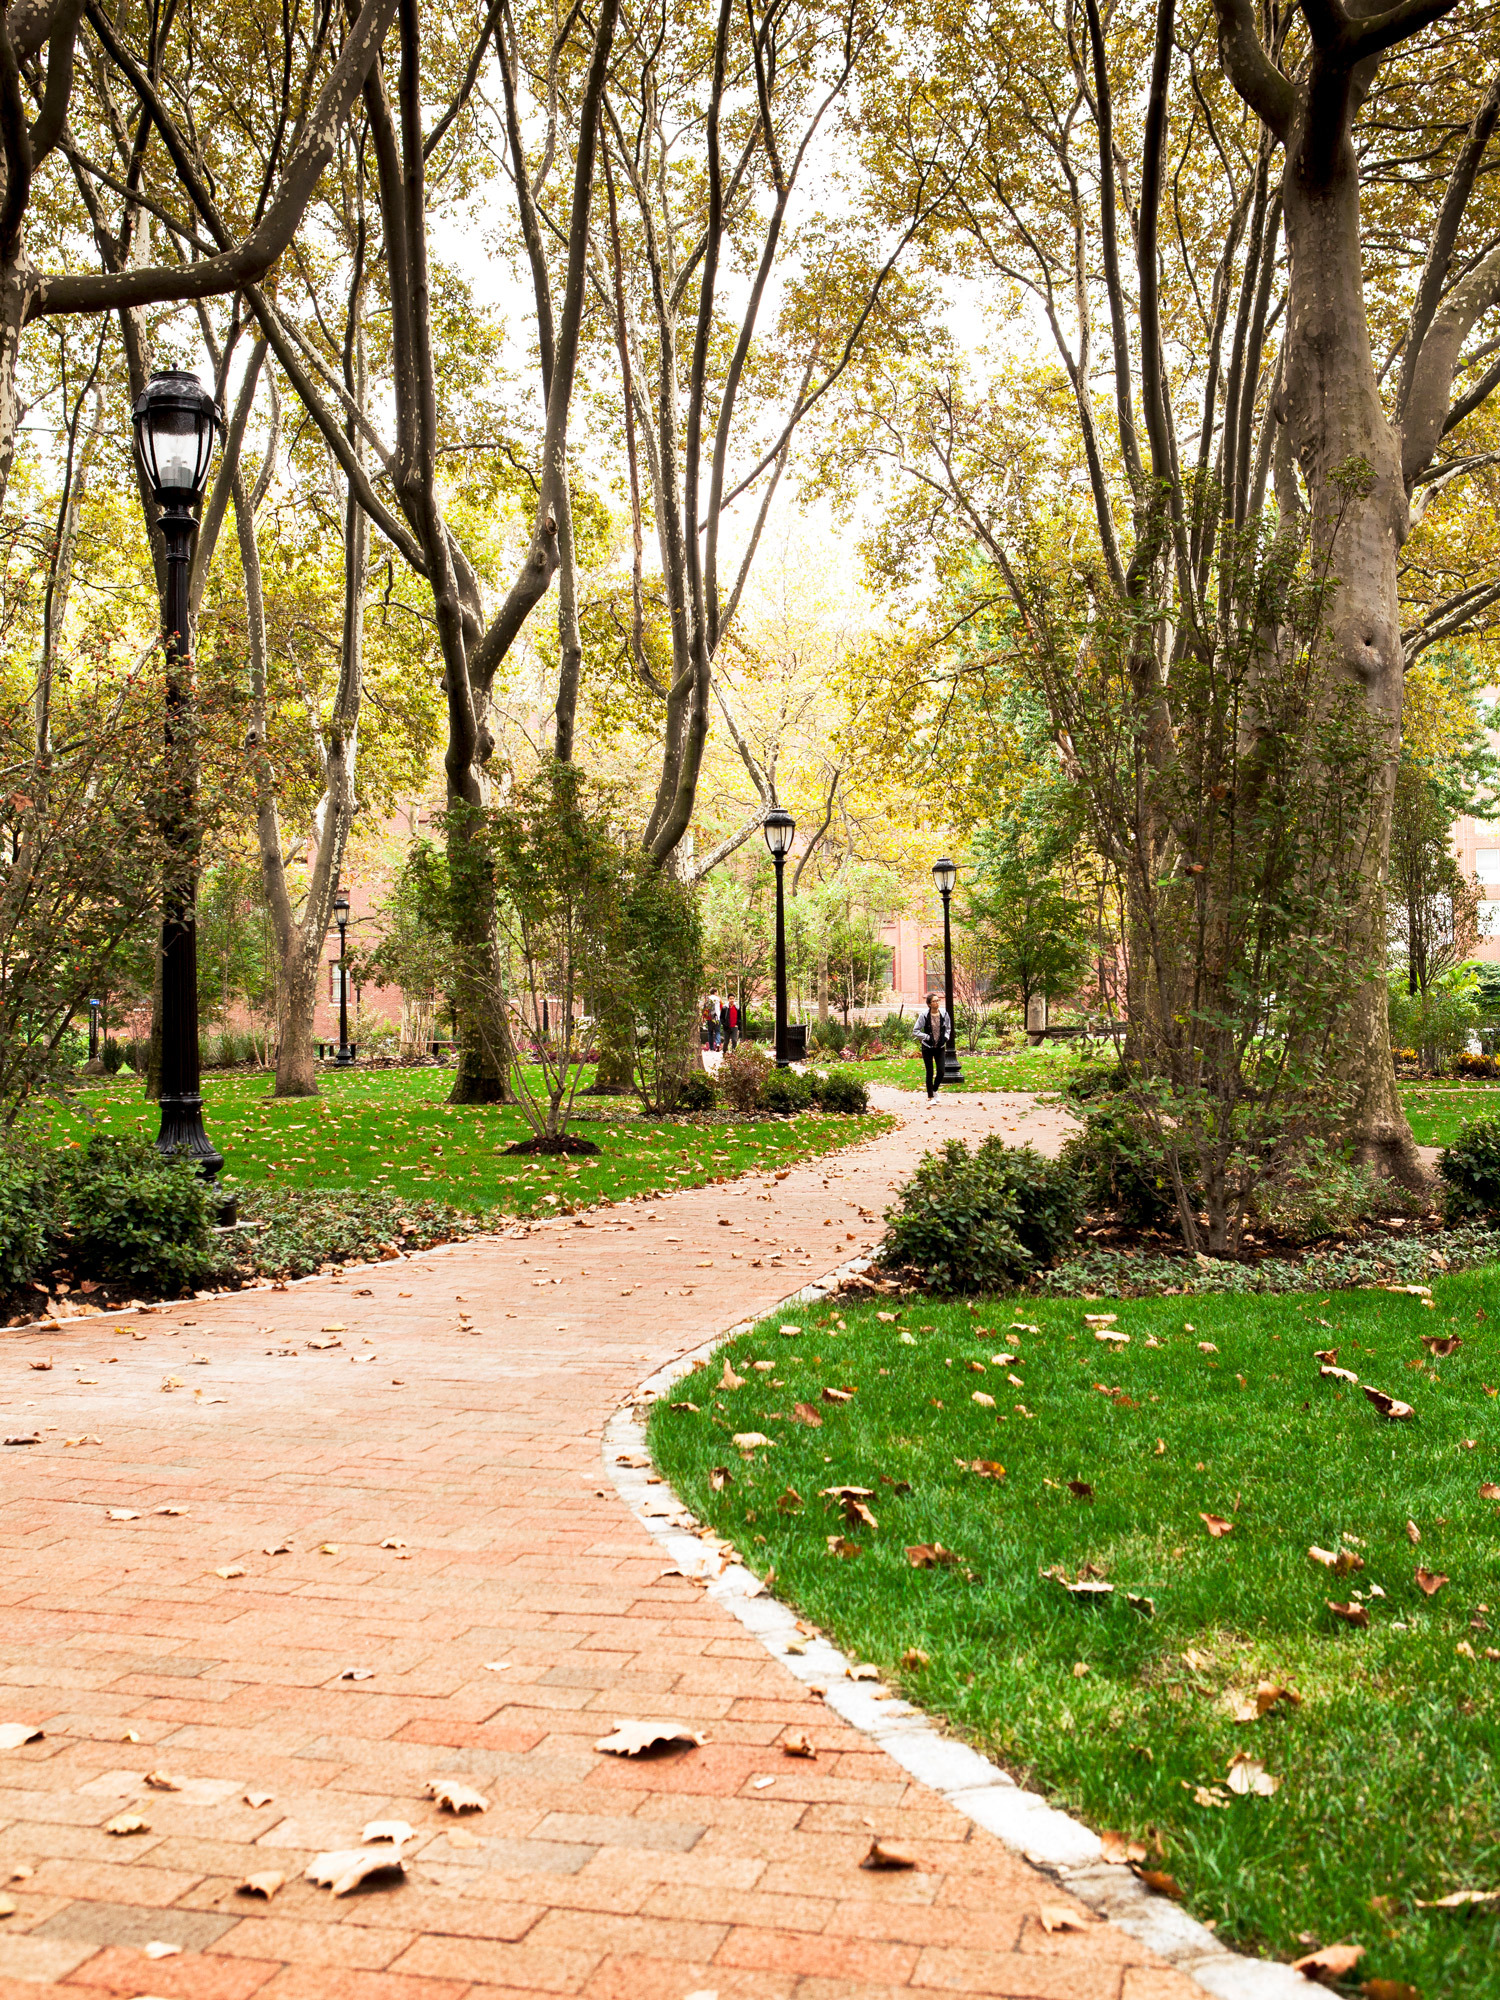 Brick pathway meanders through a tranquil park with mature trees and green lawns, leading to a classic building facade, flanked by traditional lampposts and fallen autumn leaves.